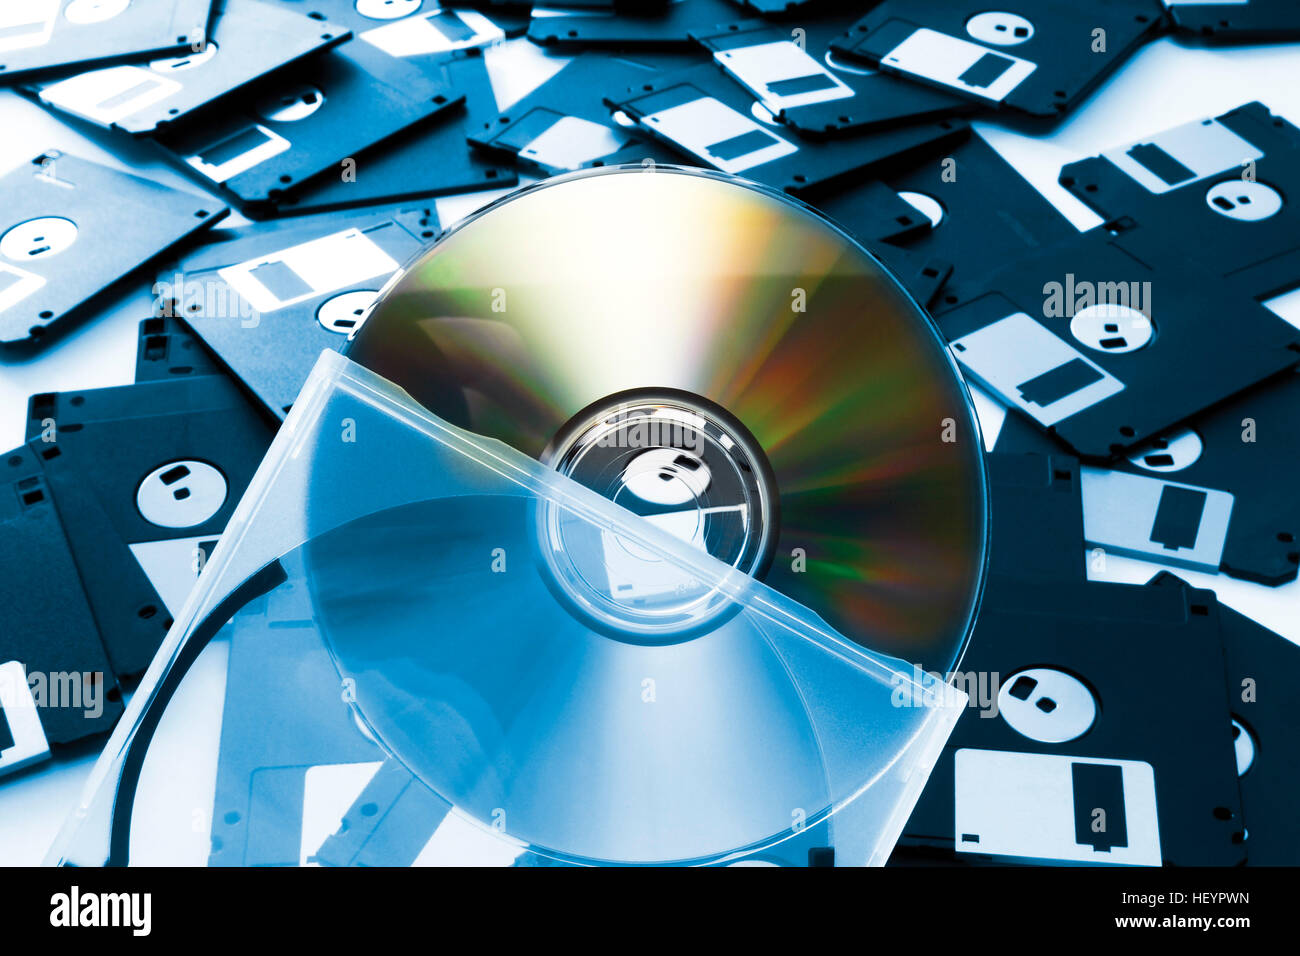 CD half out of its transparent holder in front of floppy disks Stock Photo